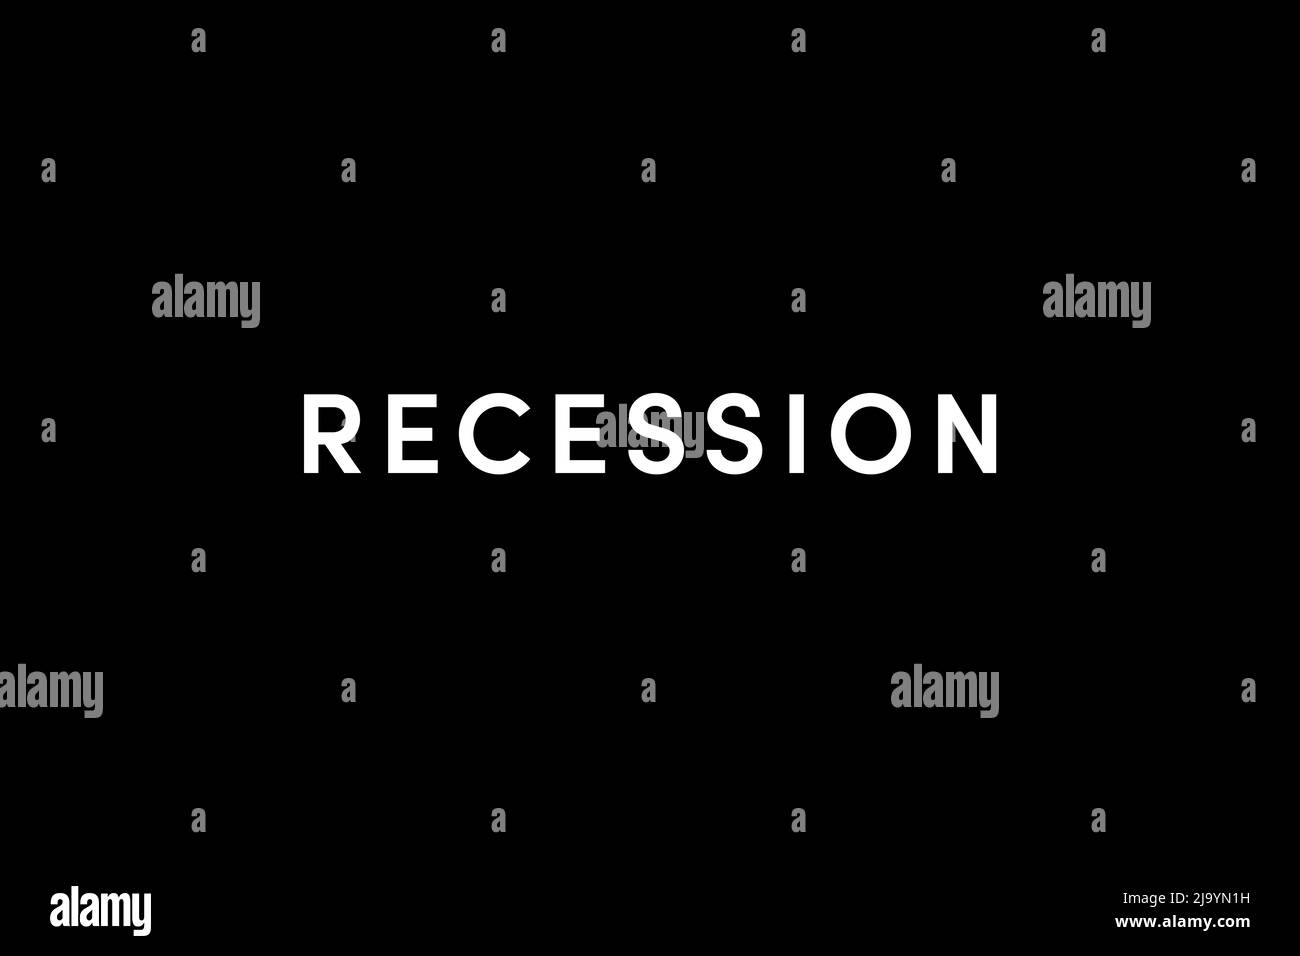 Recession is a business cycle contraction when there is a general decline in economic activity. Word Recession on black background Stock Photo